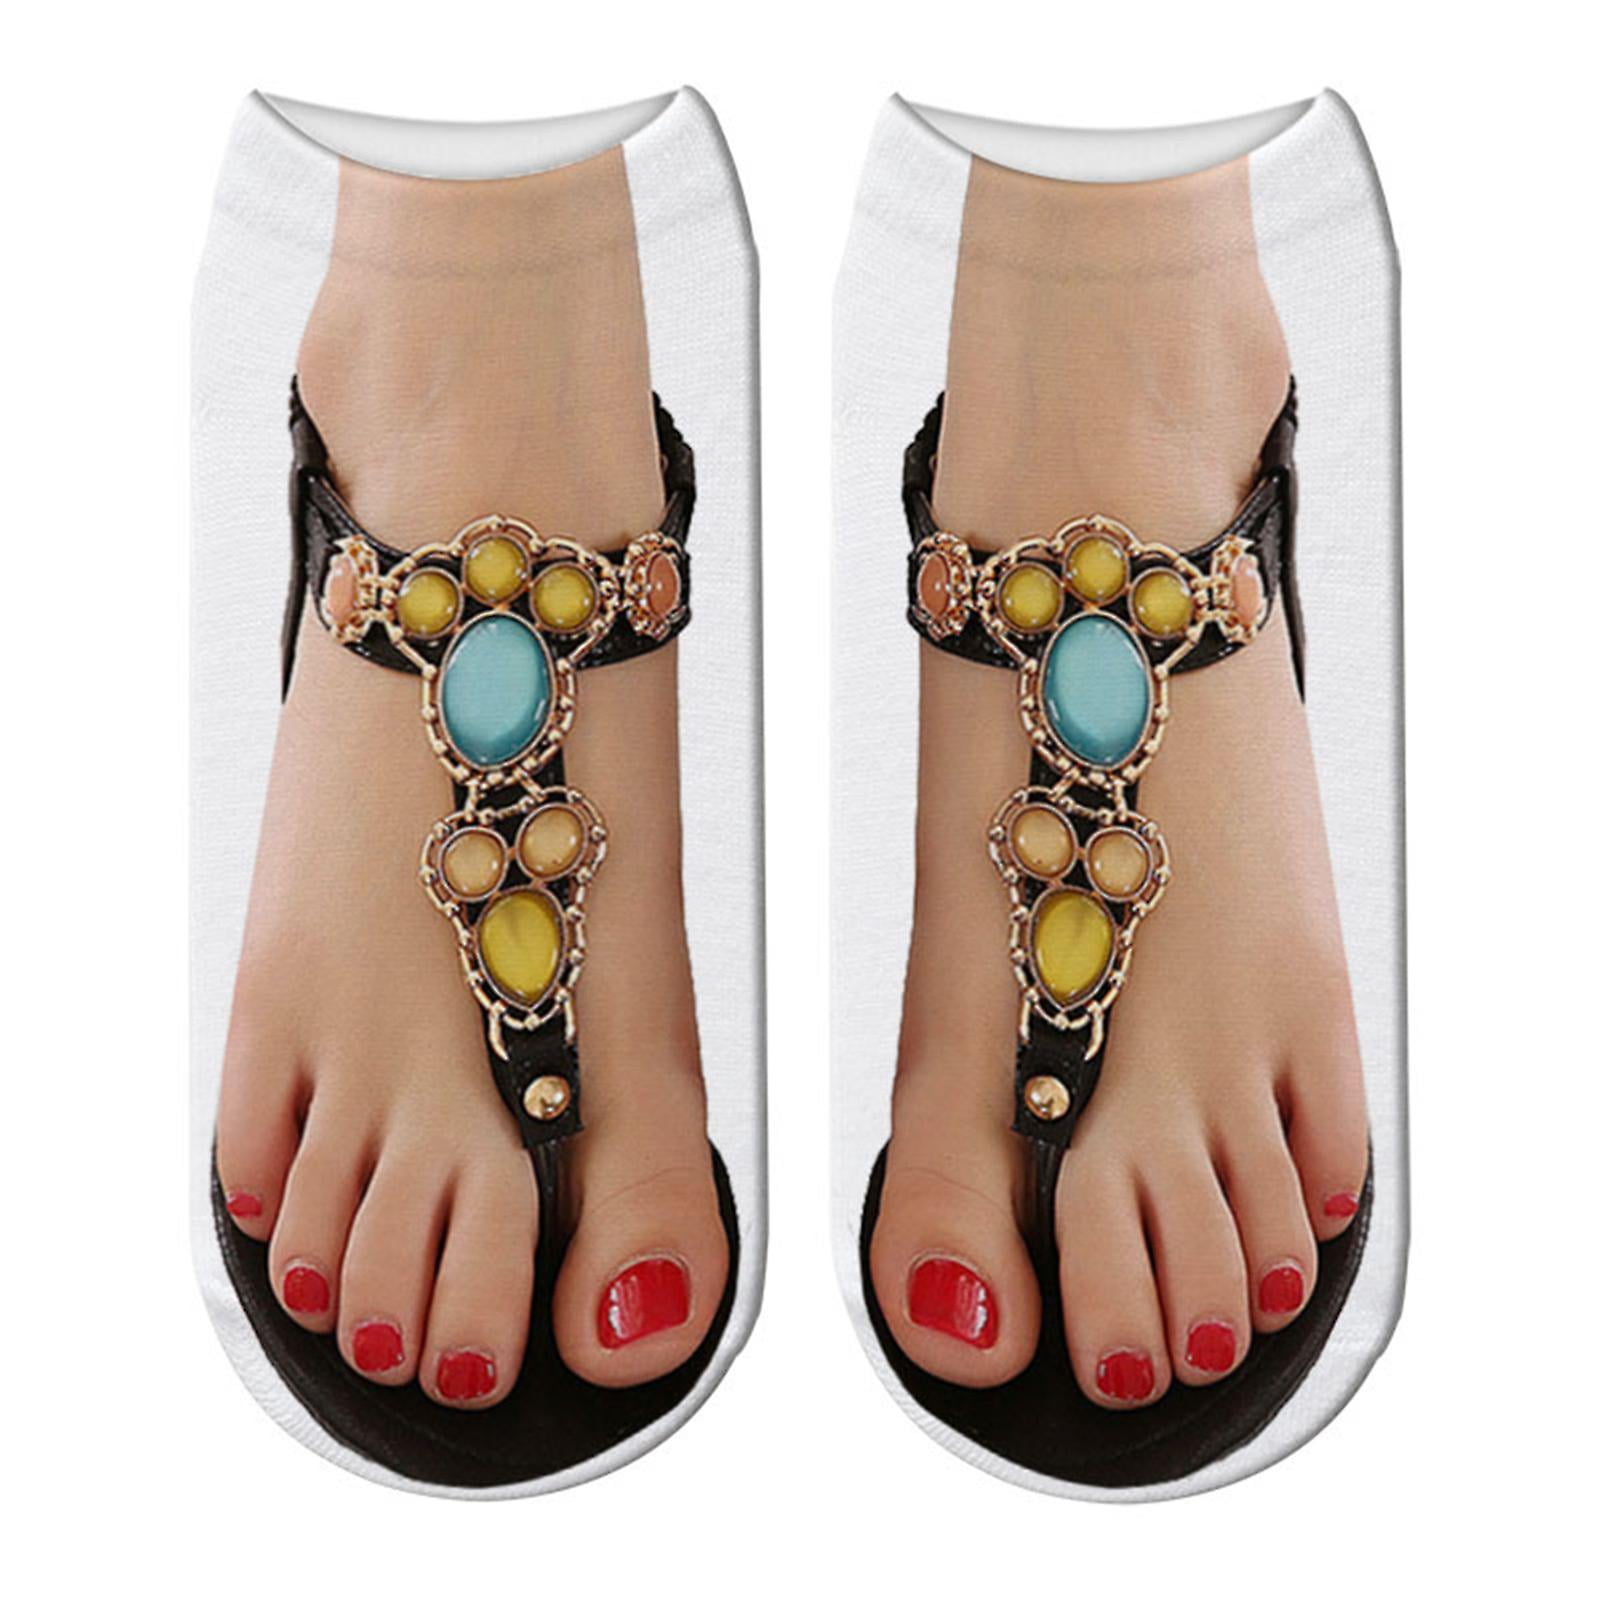 Billy Bob Zombie feet slip on ugly feet sandals mens costume accessory •  Price »